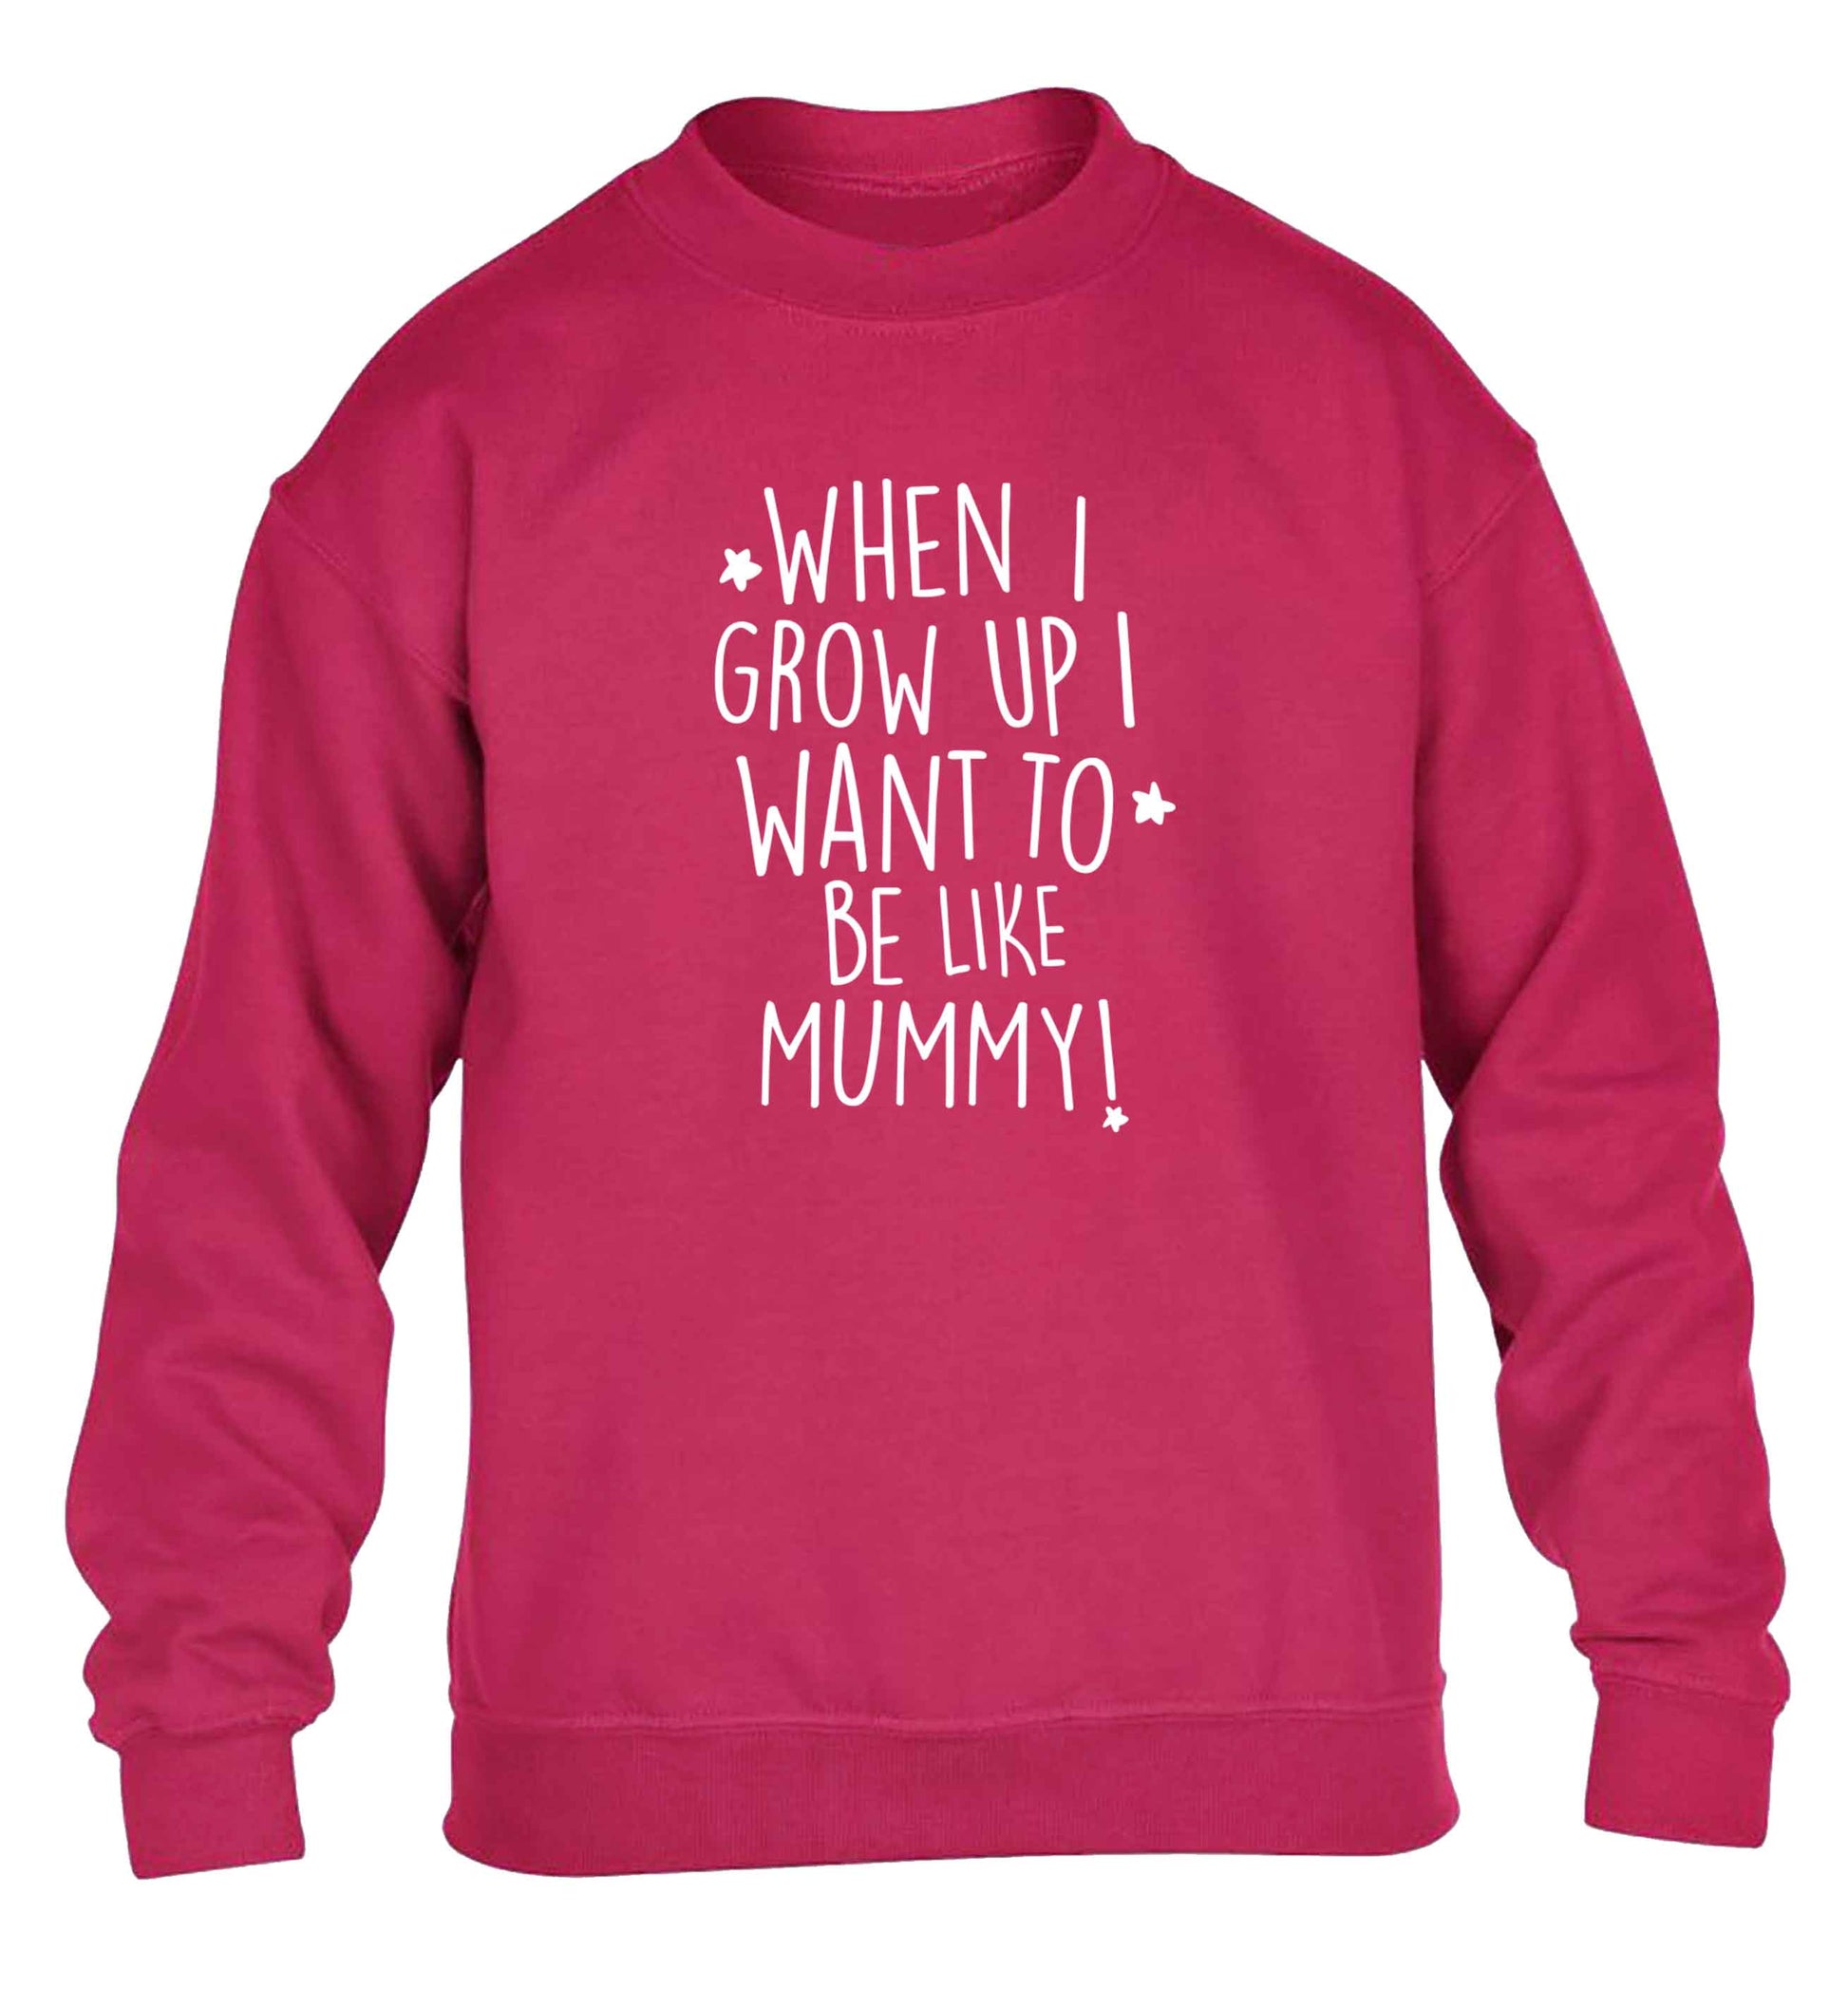 When I grow up I want to be like my mummy children's pink sweater 12-13 Years